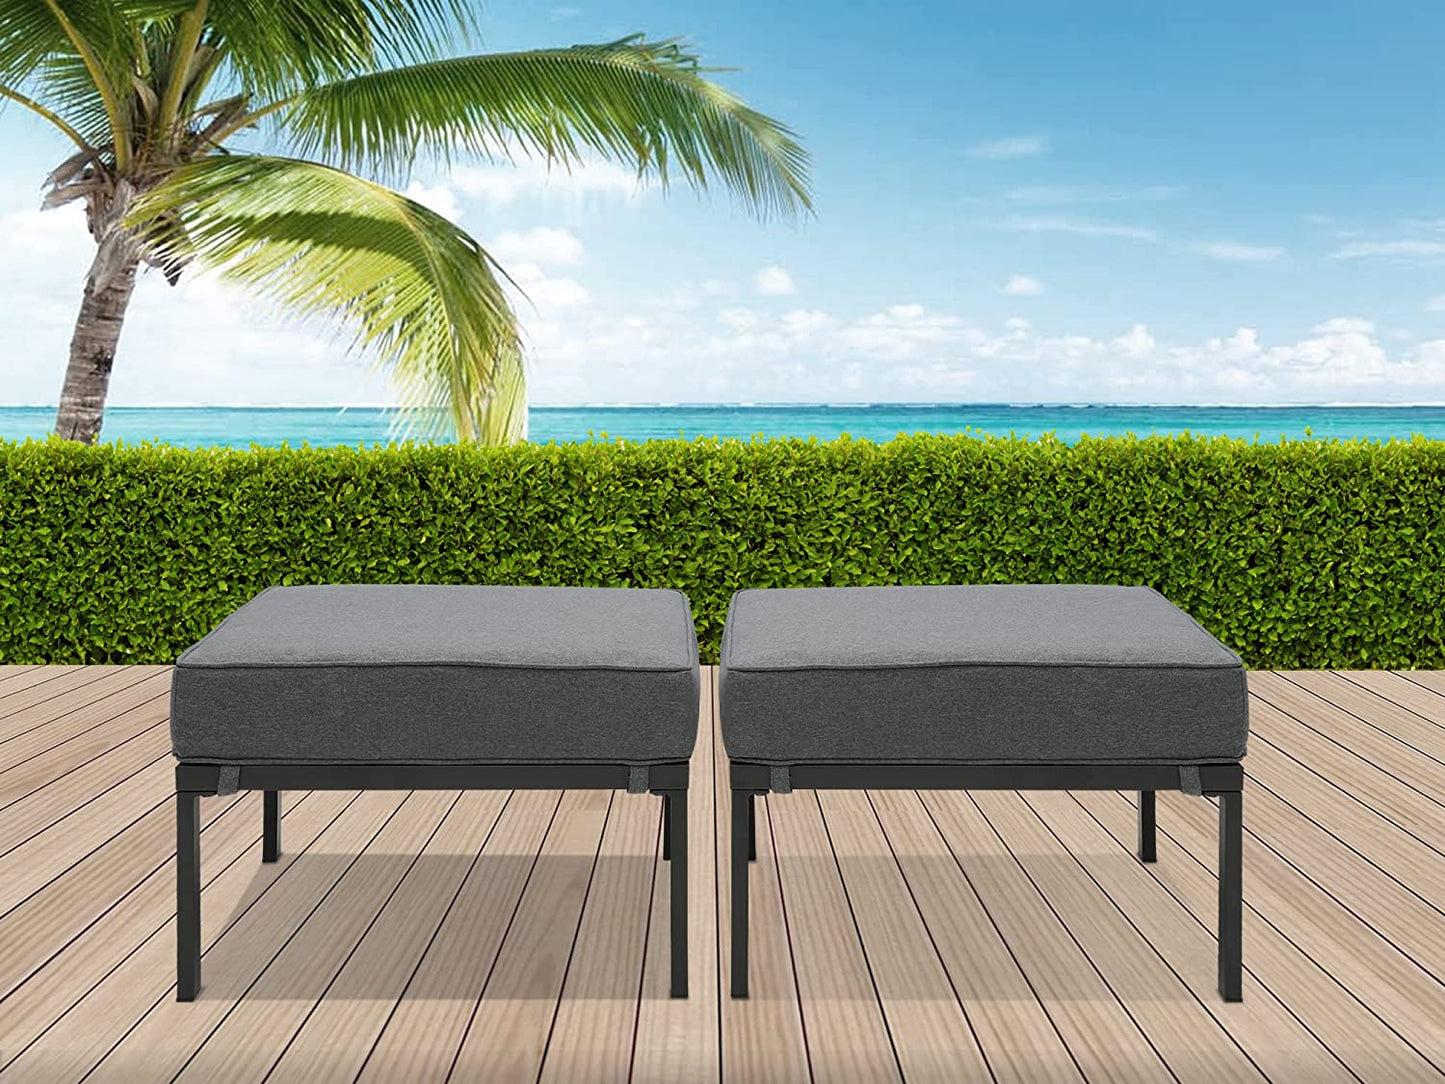 2 Pieces Patio Furniture Outdoor Ottomans, All-Weather Aluminum Outdoor Footstool Footrest